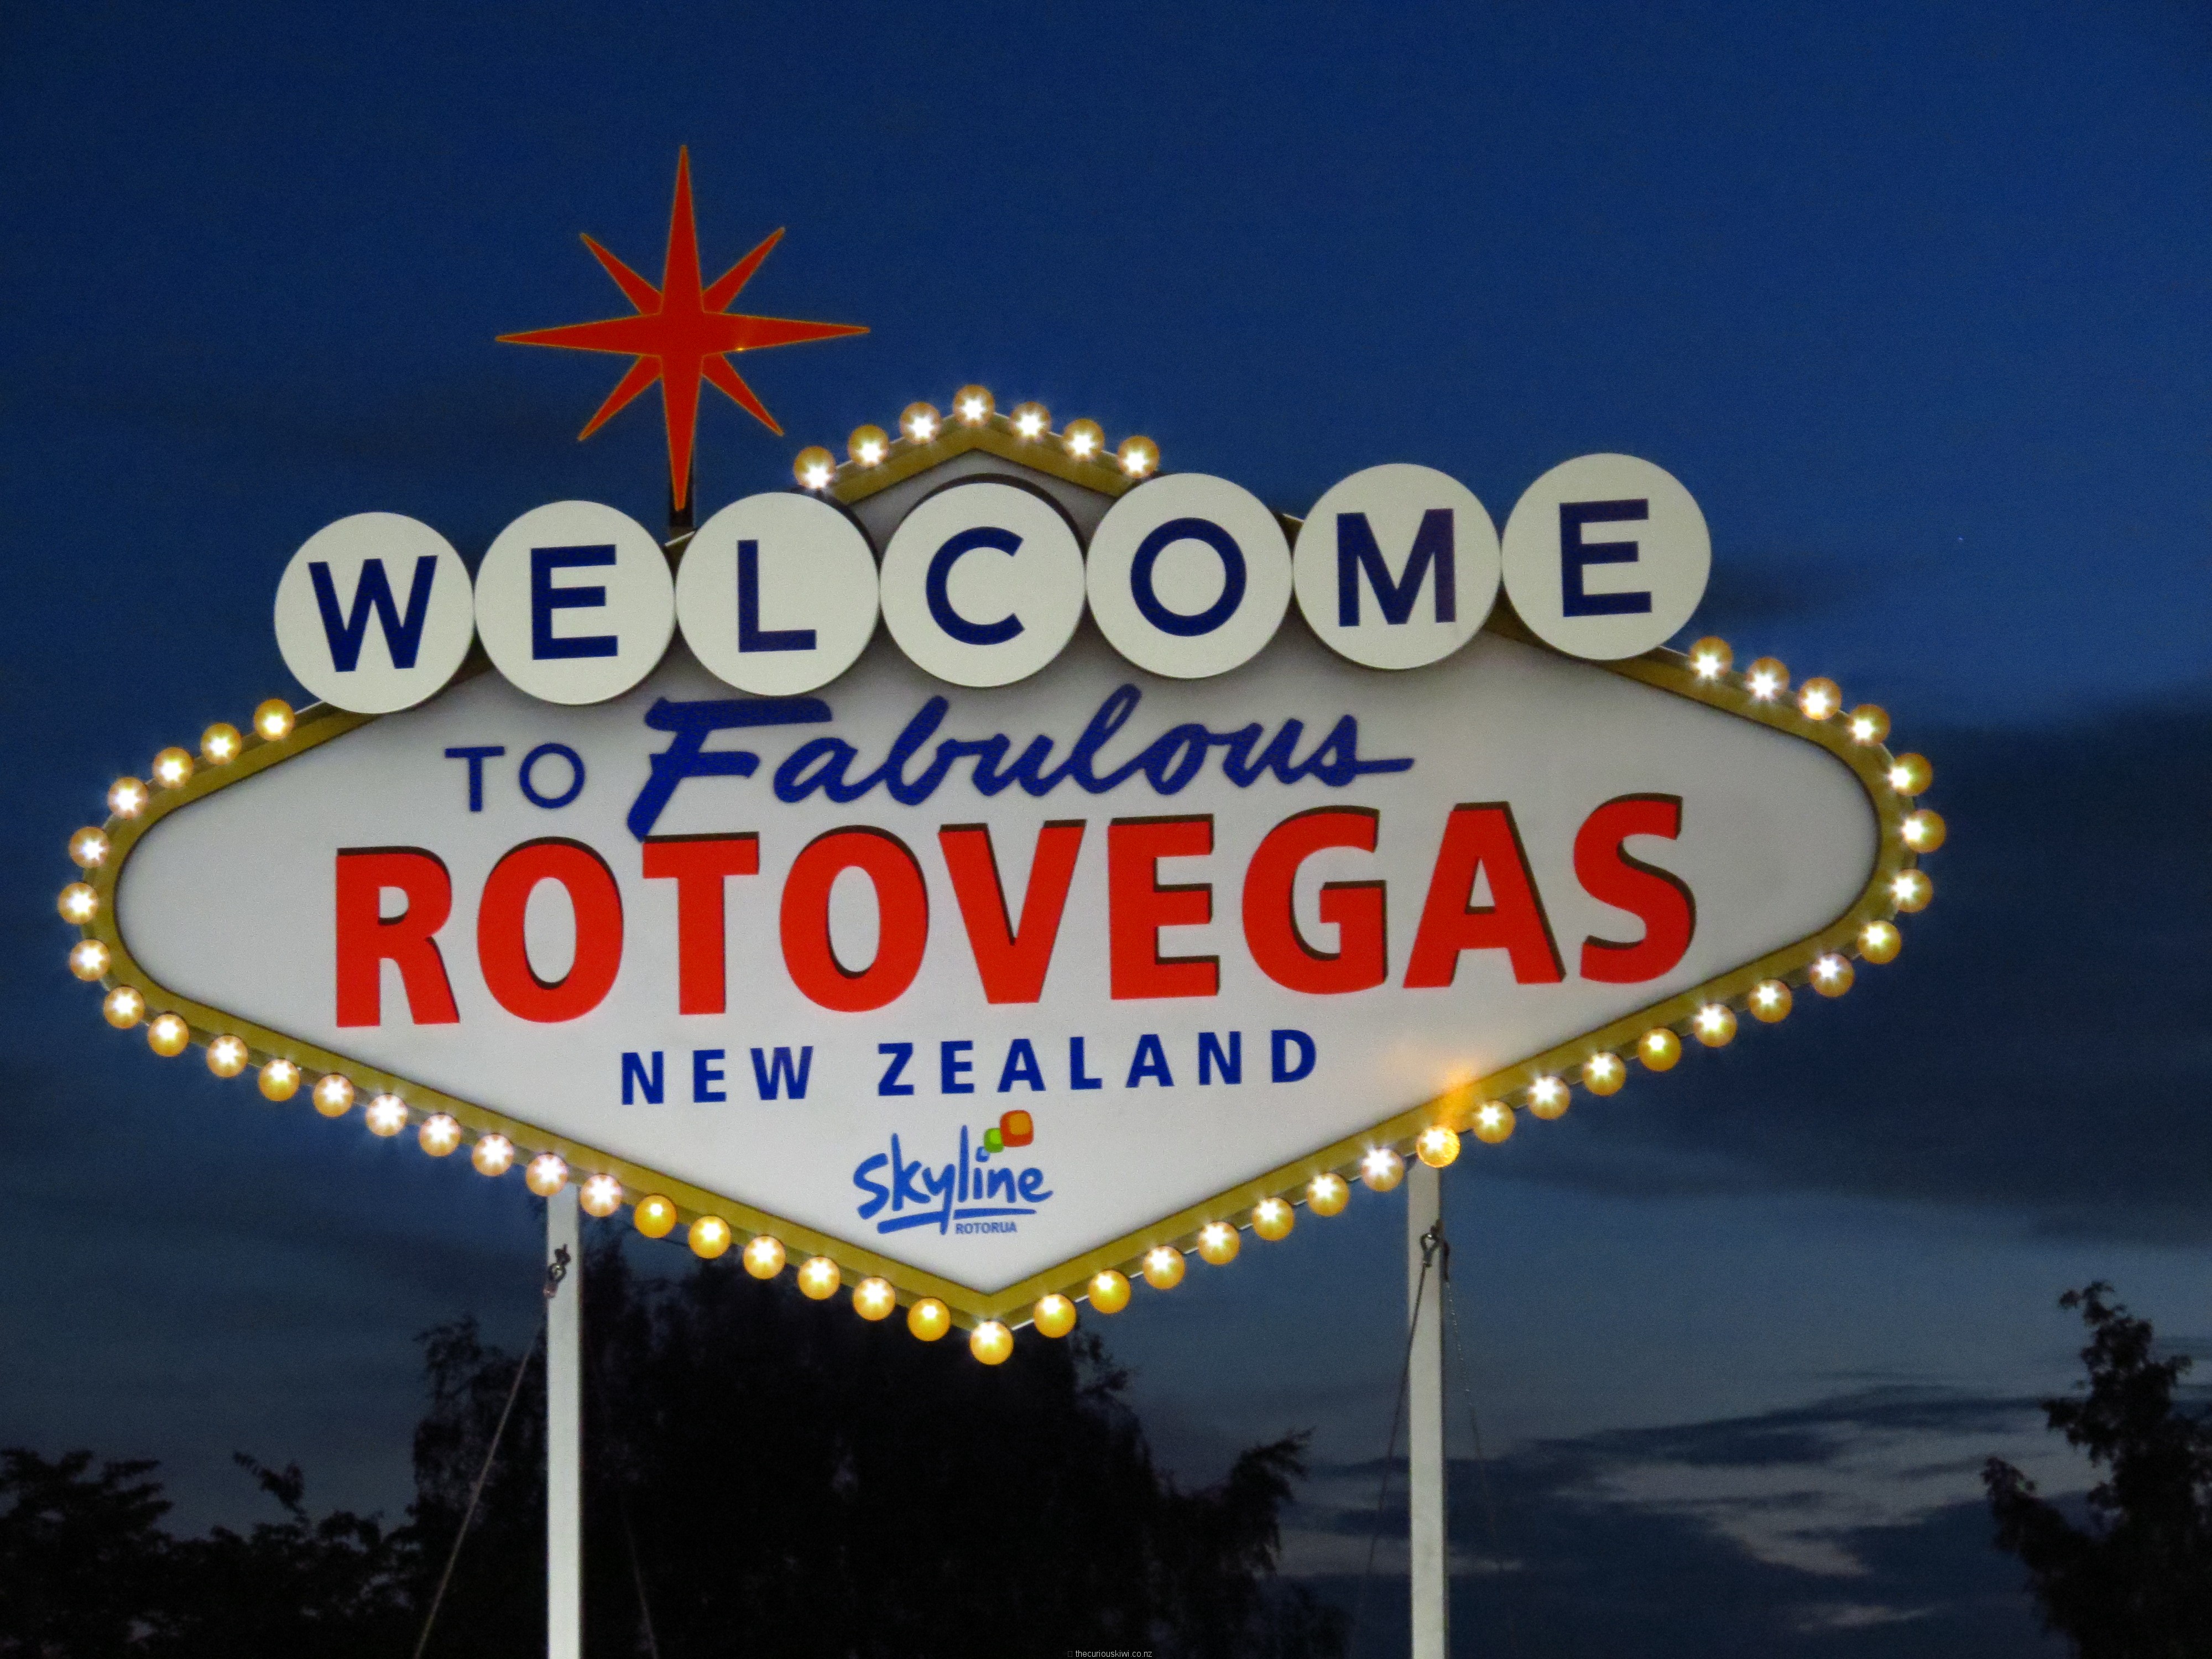 Rotovegas in lights 